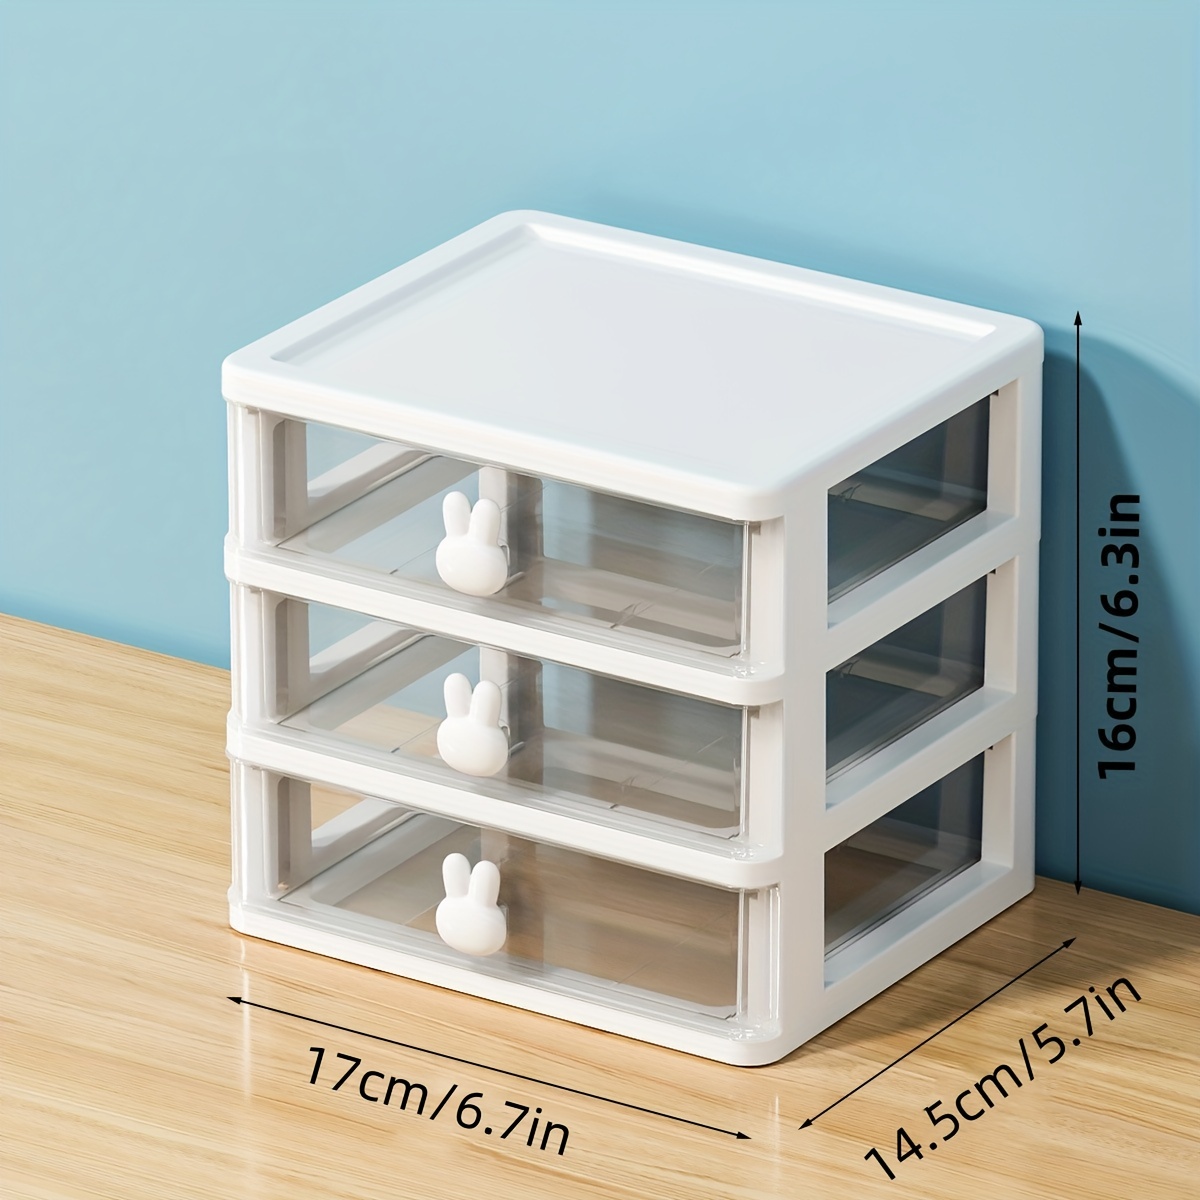 Small Plastic Organizer Box (10 Pieces) with Lid, Square Storage Box for  Medicine, Earplugs, Small Items, Cosmetics, Crafts, DimaStore price from  souq in Egypt - Yaoota!